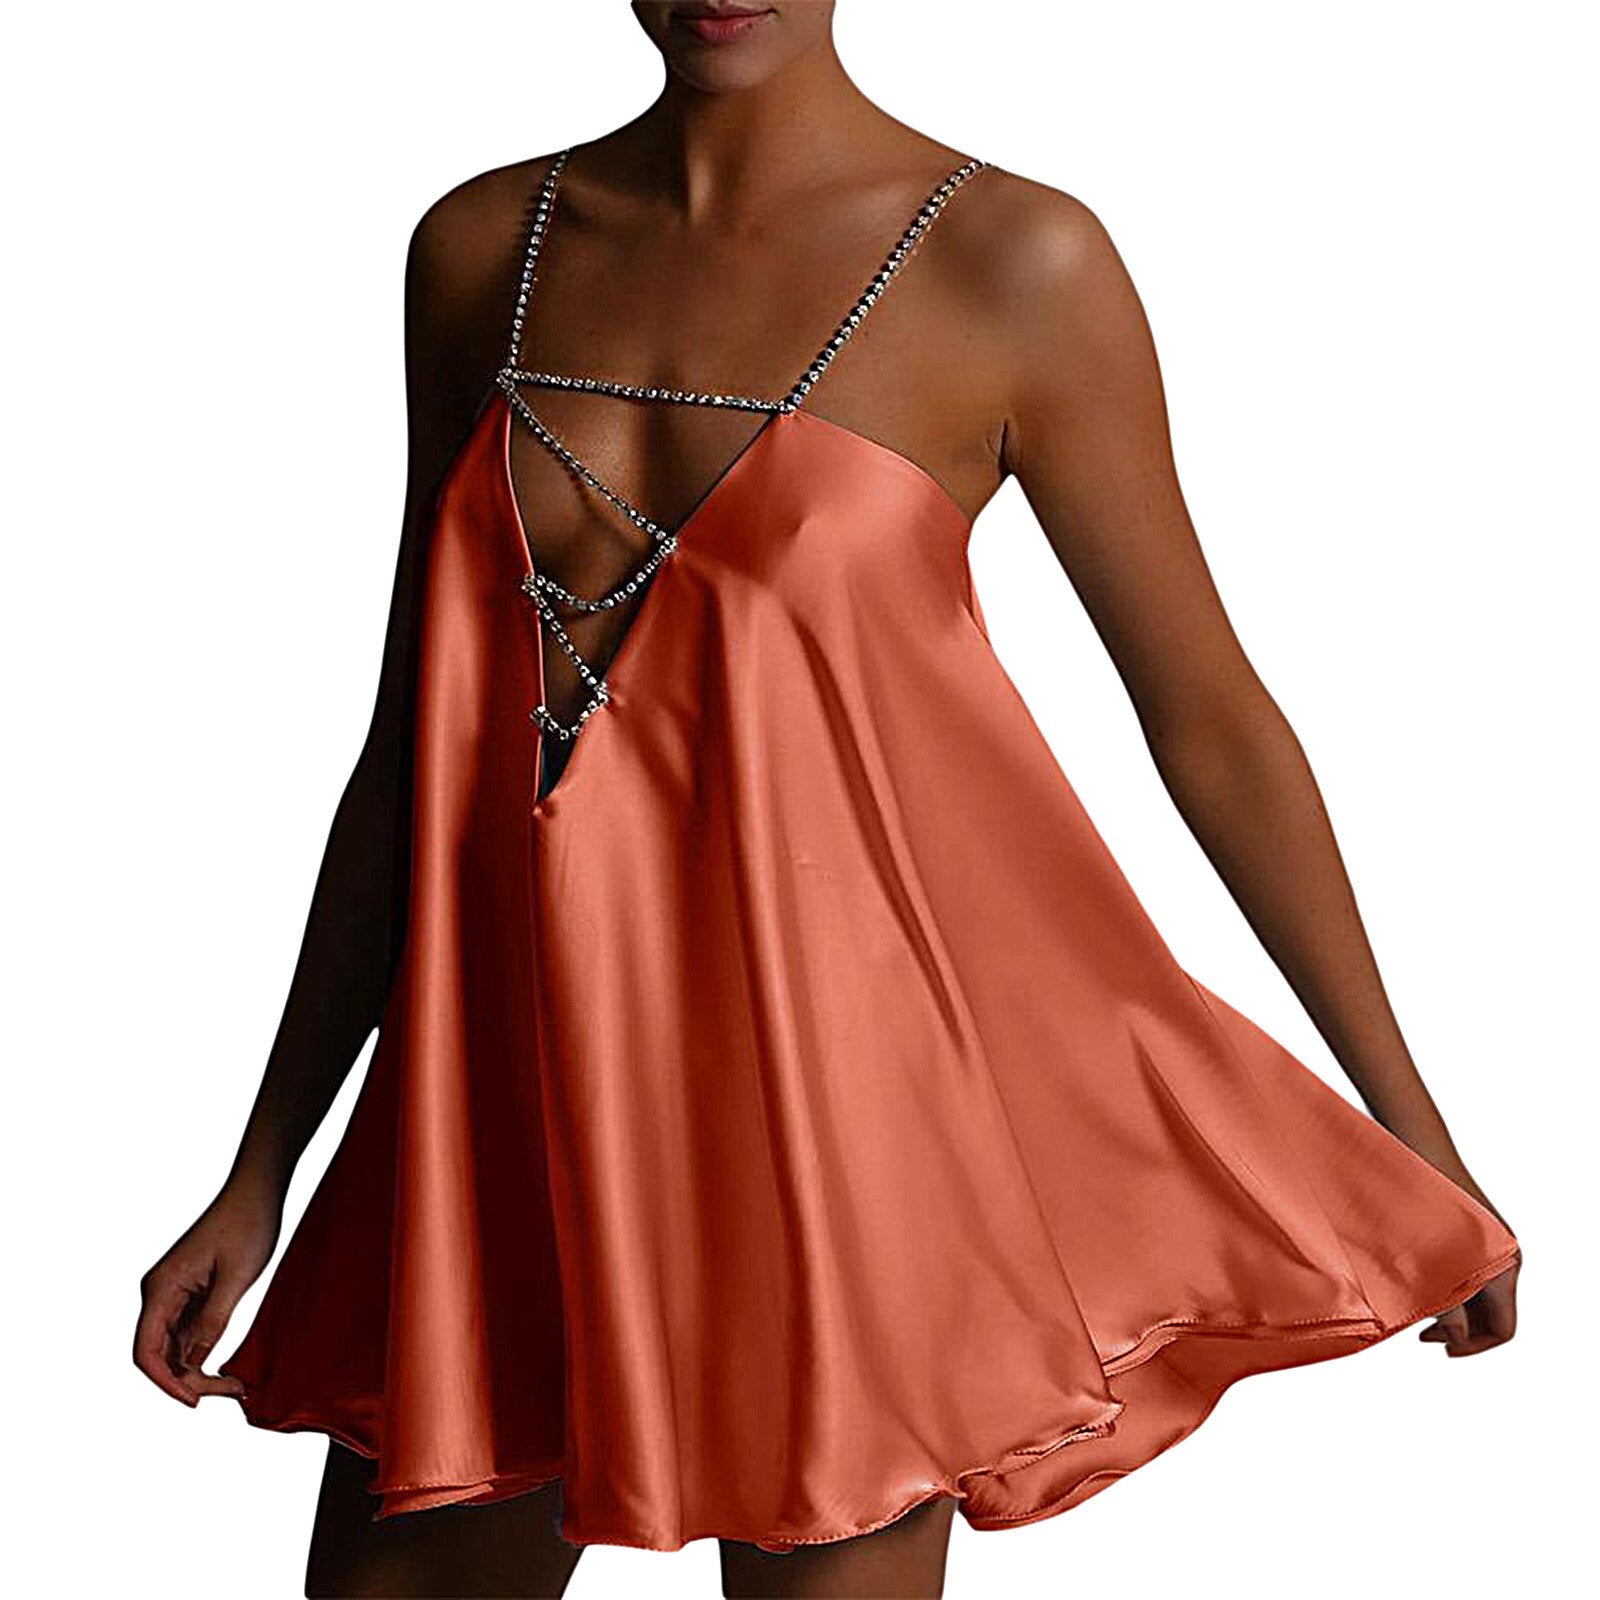 Chicmy Sexy Deep V Neck Backless Lady Mini Dress Fashion Metal Chain Sling Party Dress Elegant Women Solid Pleated Beach Short Dresses